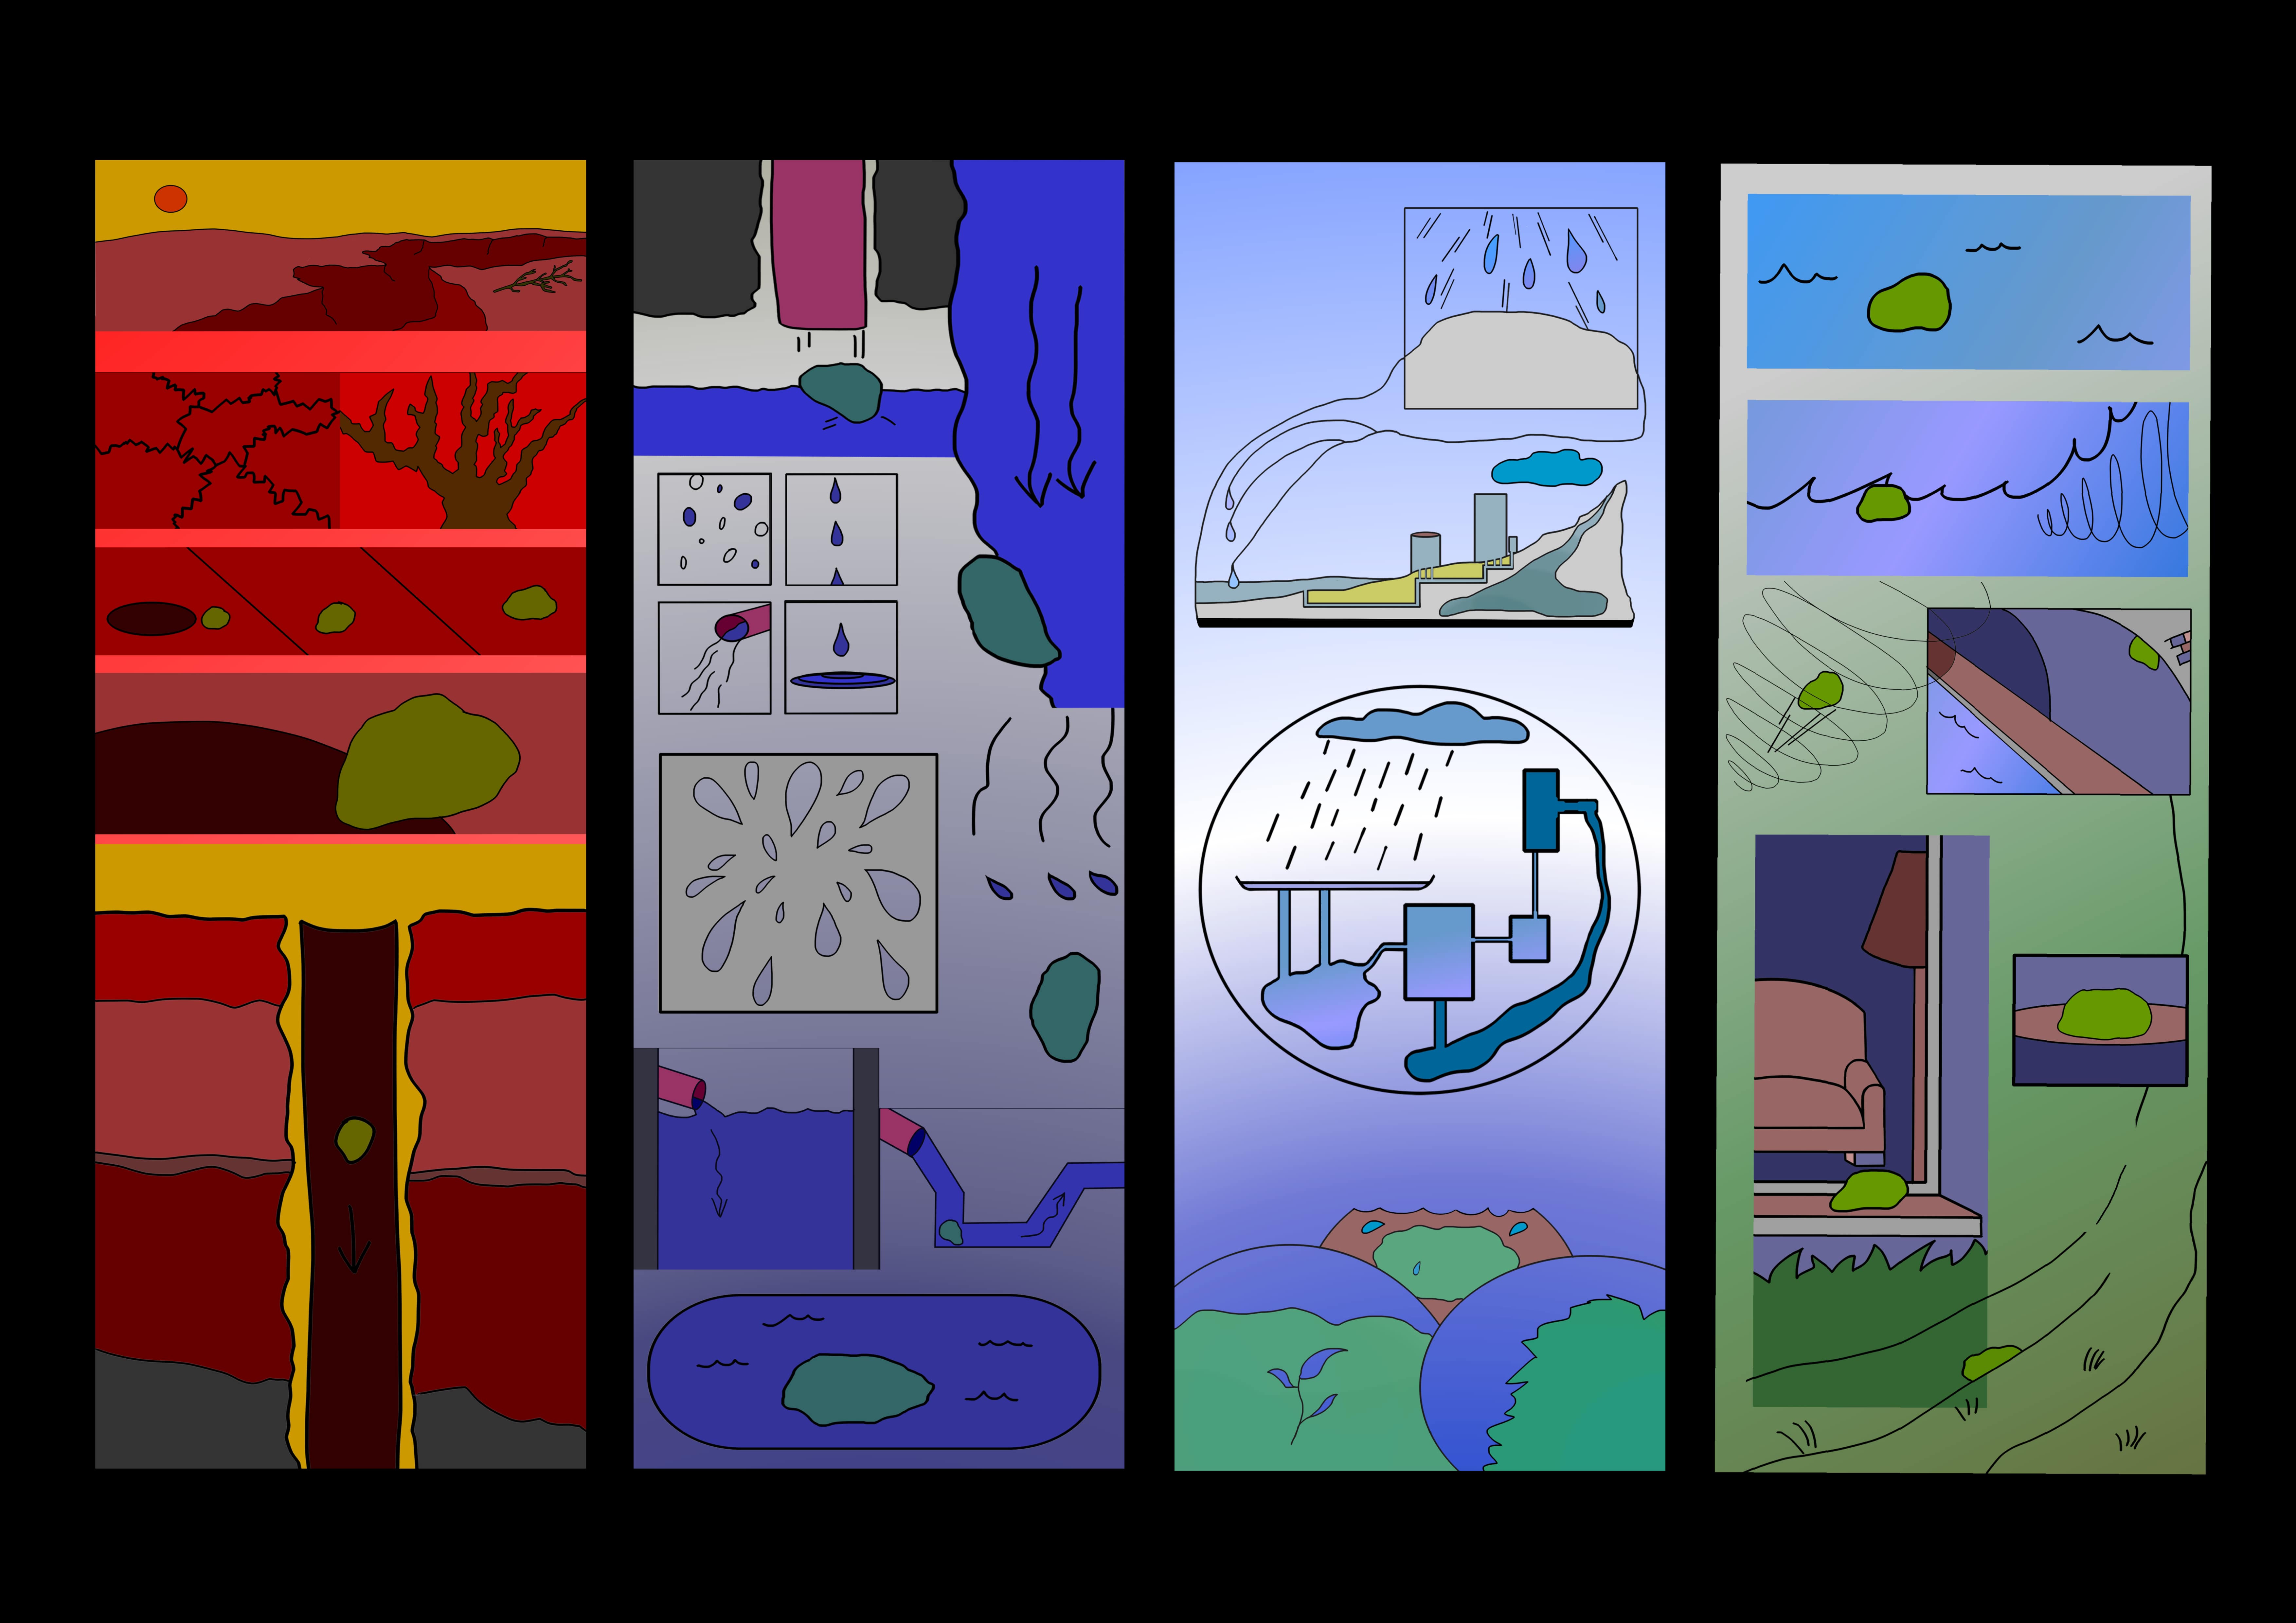 4 comic strip vertical banners. left image shows a red comic strip of a desert scene, the second image shows a grey and purple comic strip of underground pipes, third image shows a light blue background with water treatment plant and earth cross-section, fourth image shows a tree on the right and a mound of moss movng through an urban environment 